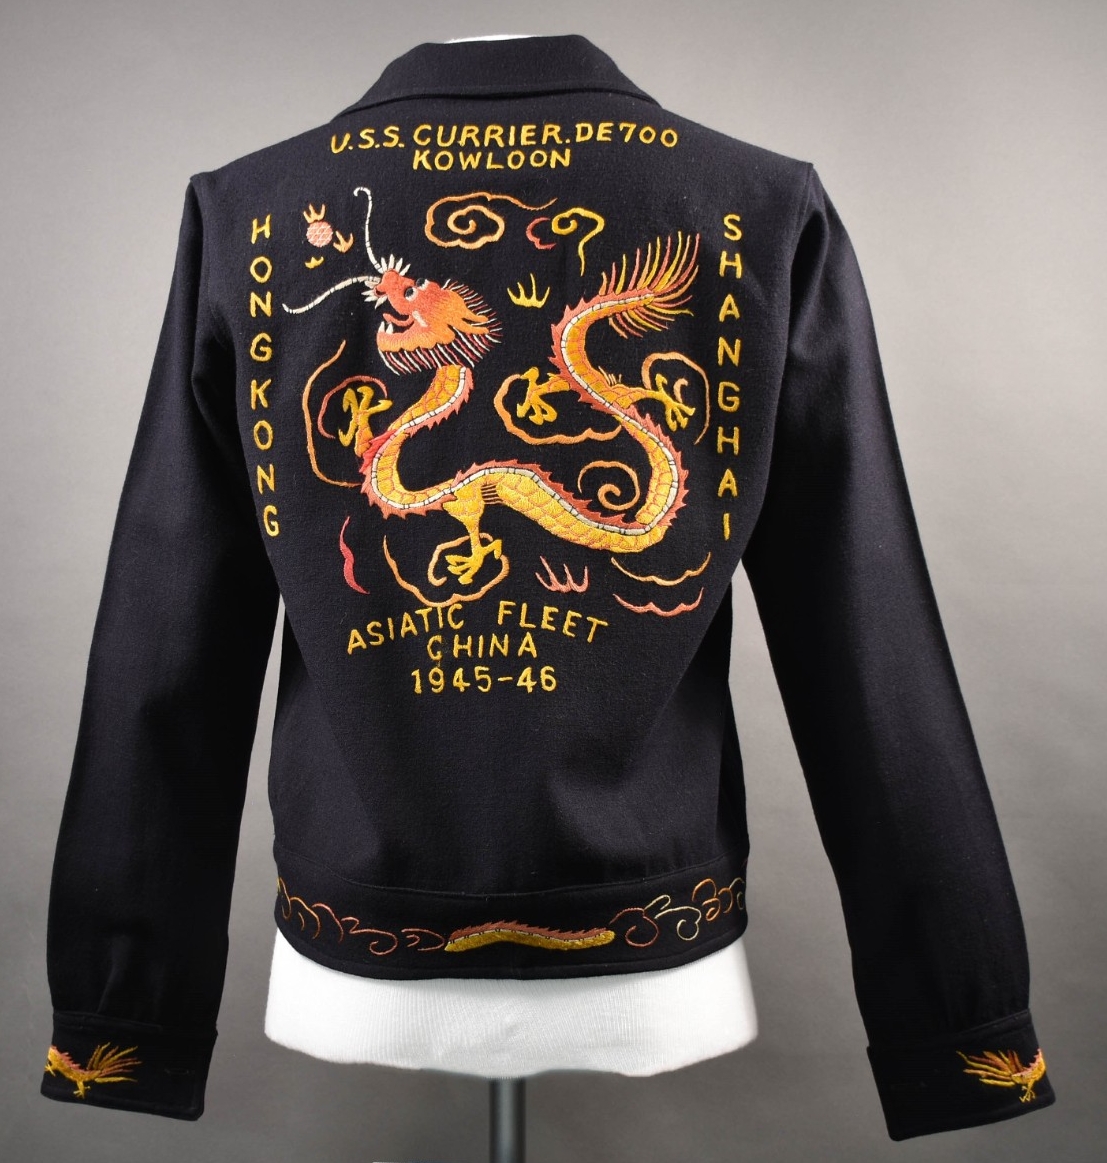 <p>The back of the blue wool cruise jacket decorated with colorful embroidery. At the center of the back is a large colorful embroidered Asian-style dragon. Embroidered in yellow around the edges of the image is “U.S.S. Currier. DE700 / Hong Kong / Kowloon / Shanghai / Asiatic Fleet China 1945-46.” The waist trim is also embroidered with a section of a dragon body and various geometric designs.</p>
